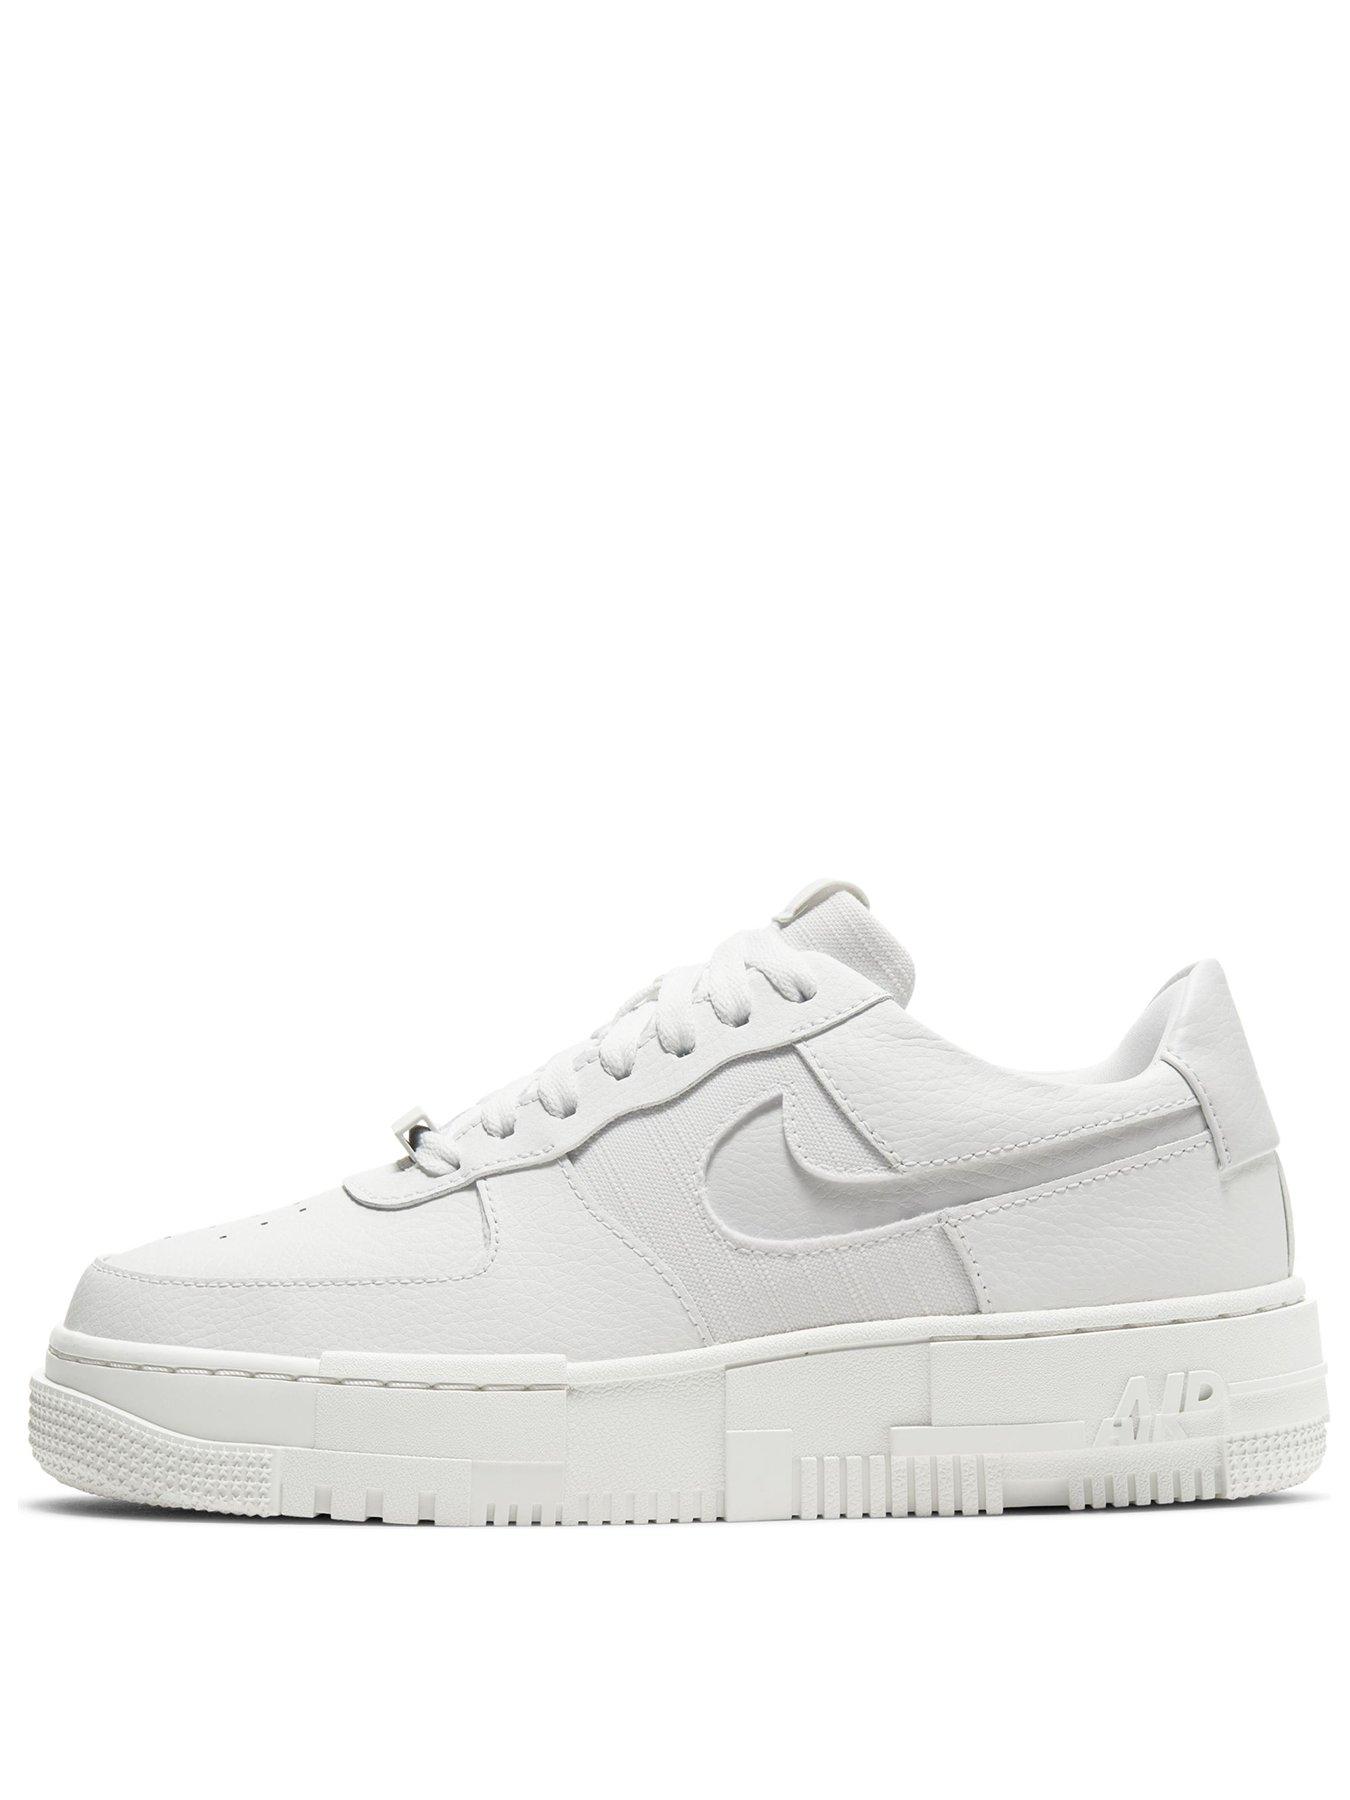 littlewoods air force 1